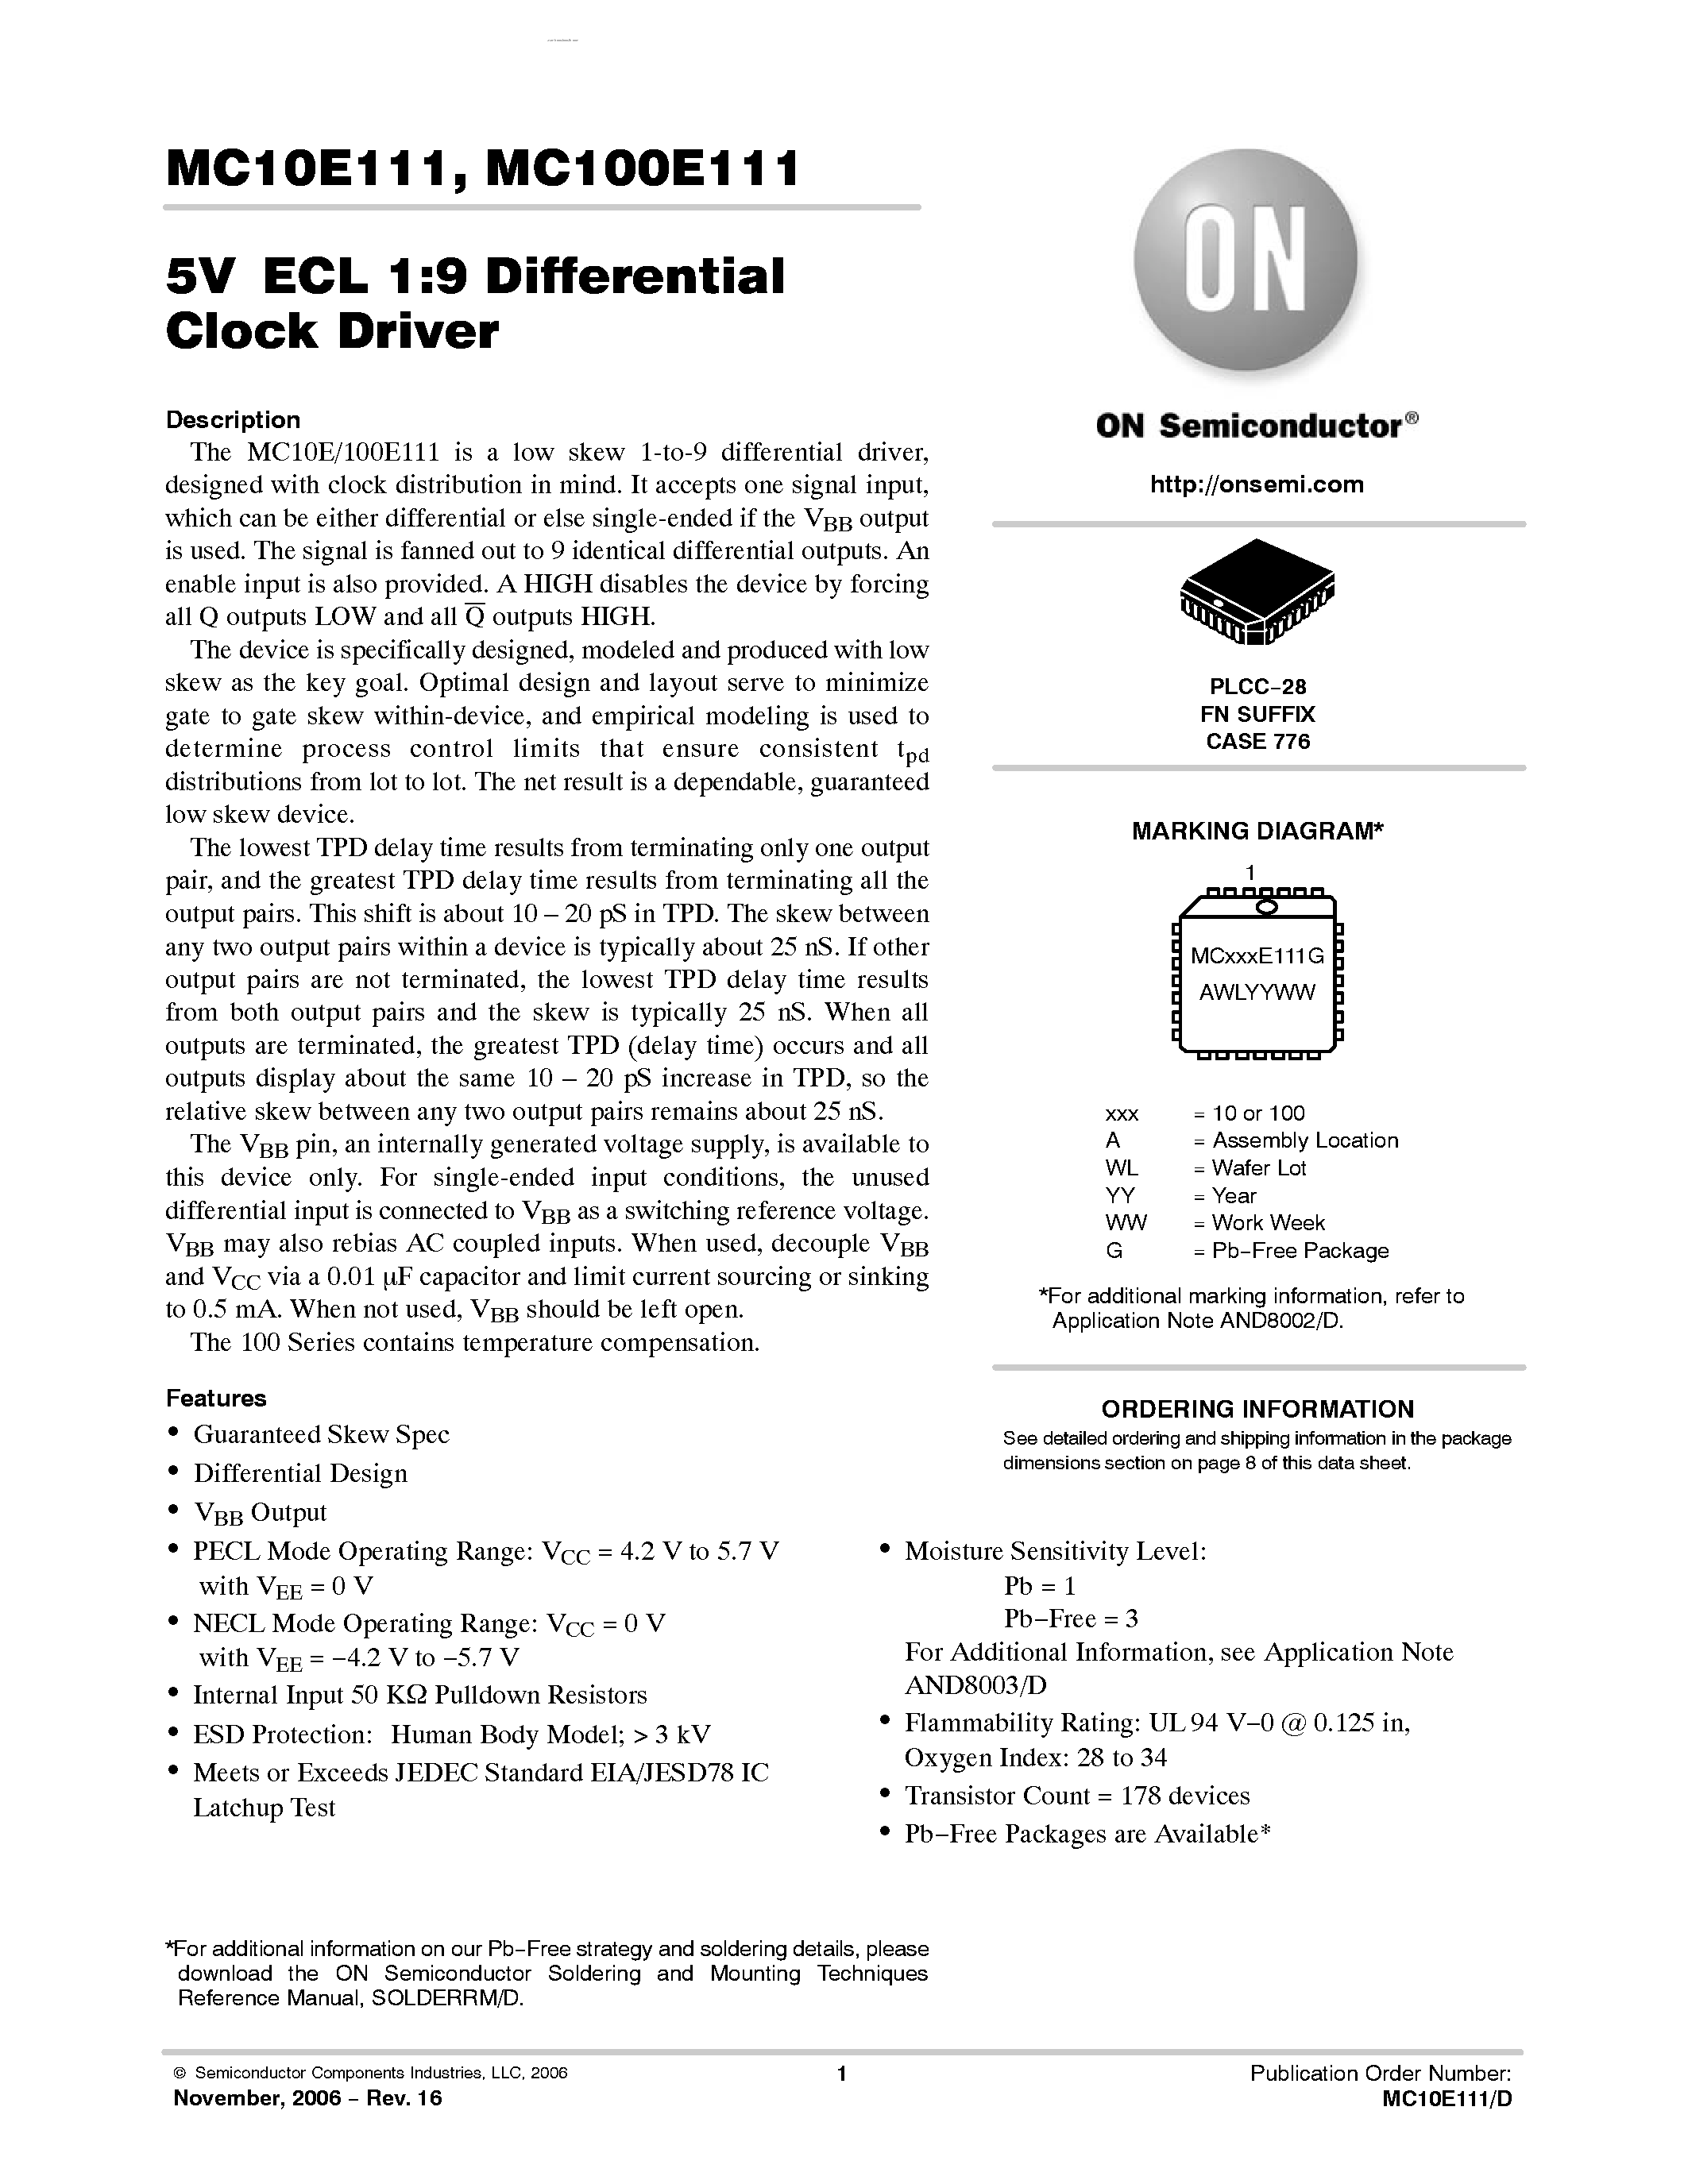 Datasheet MC100E111 - 1:9 DIFFERENTIAL CLOCK DRIVER page 1